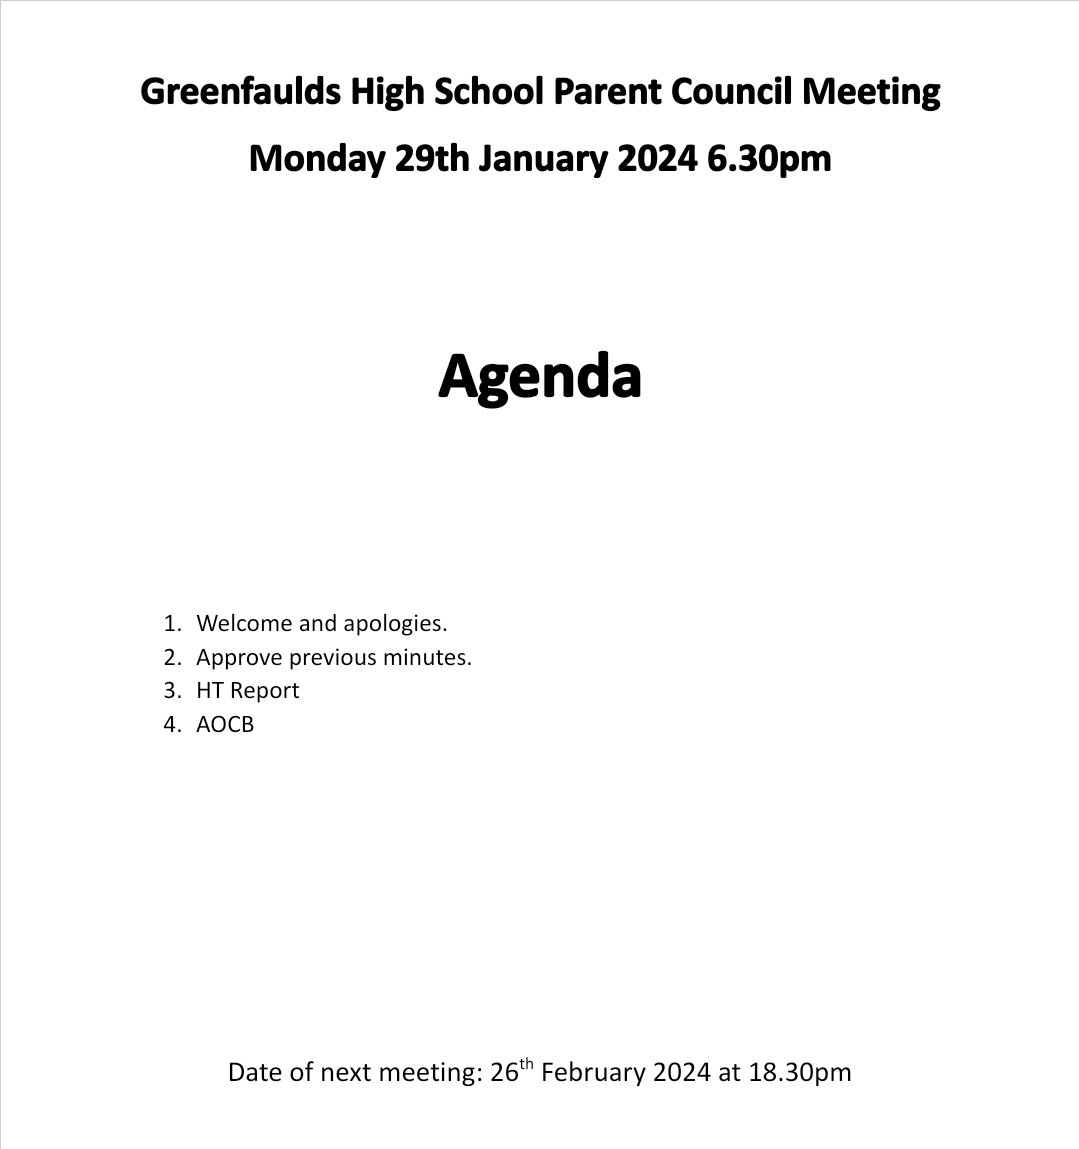 The next @Greenfaulds_HS Parent Council Meeting will take place online on Monday January 29 at 6:30pm. All parents/carers of young people at the school are welcome to attend and should contact the school office for the required link. Please see the attached image for the agenda.